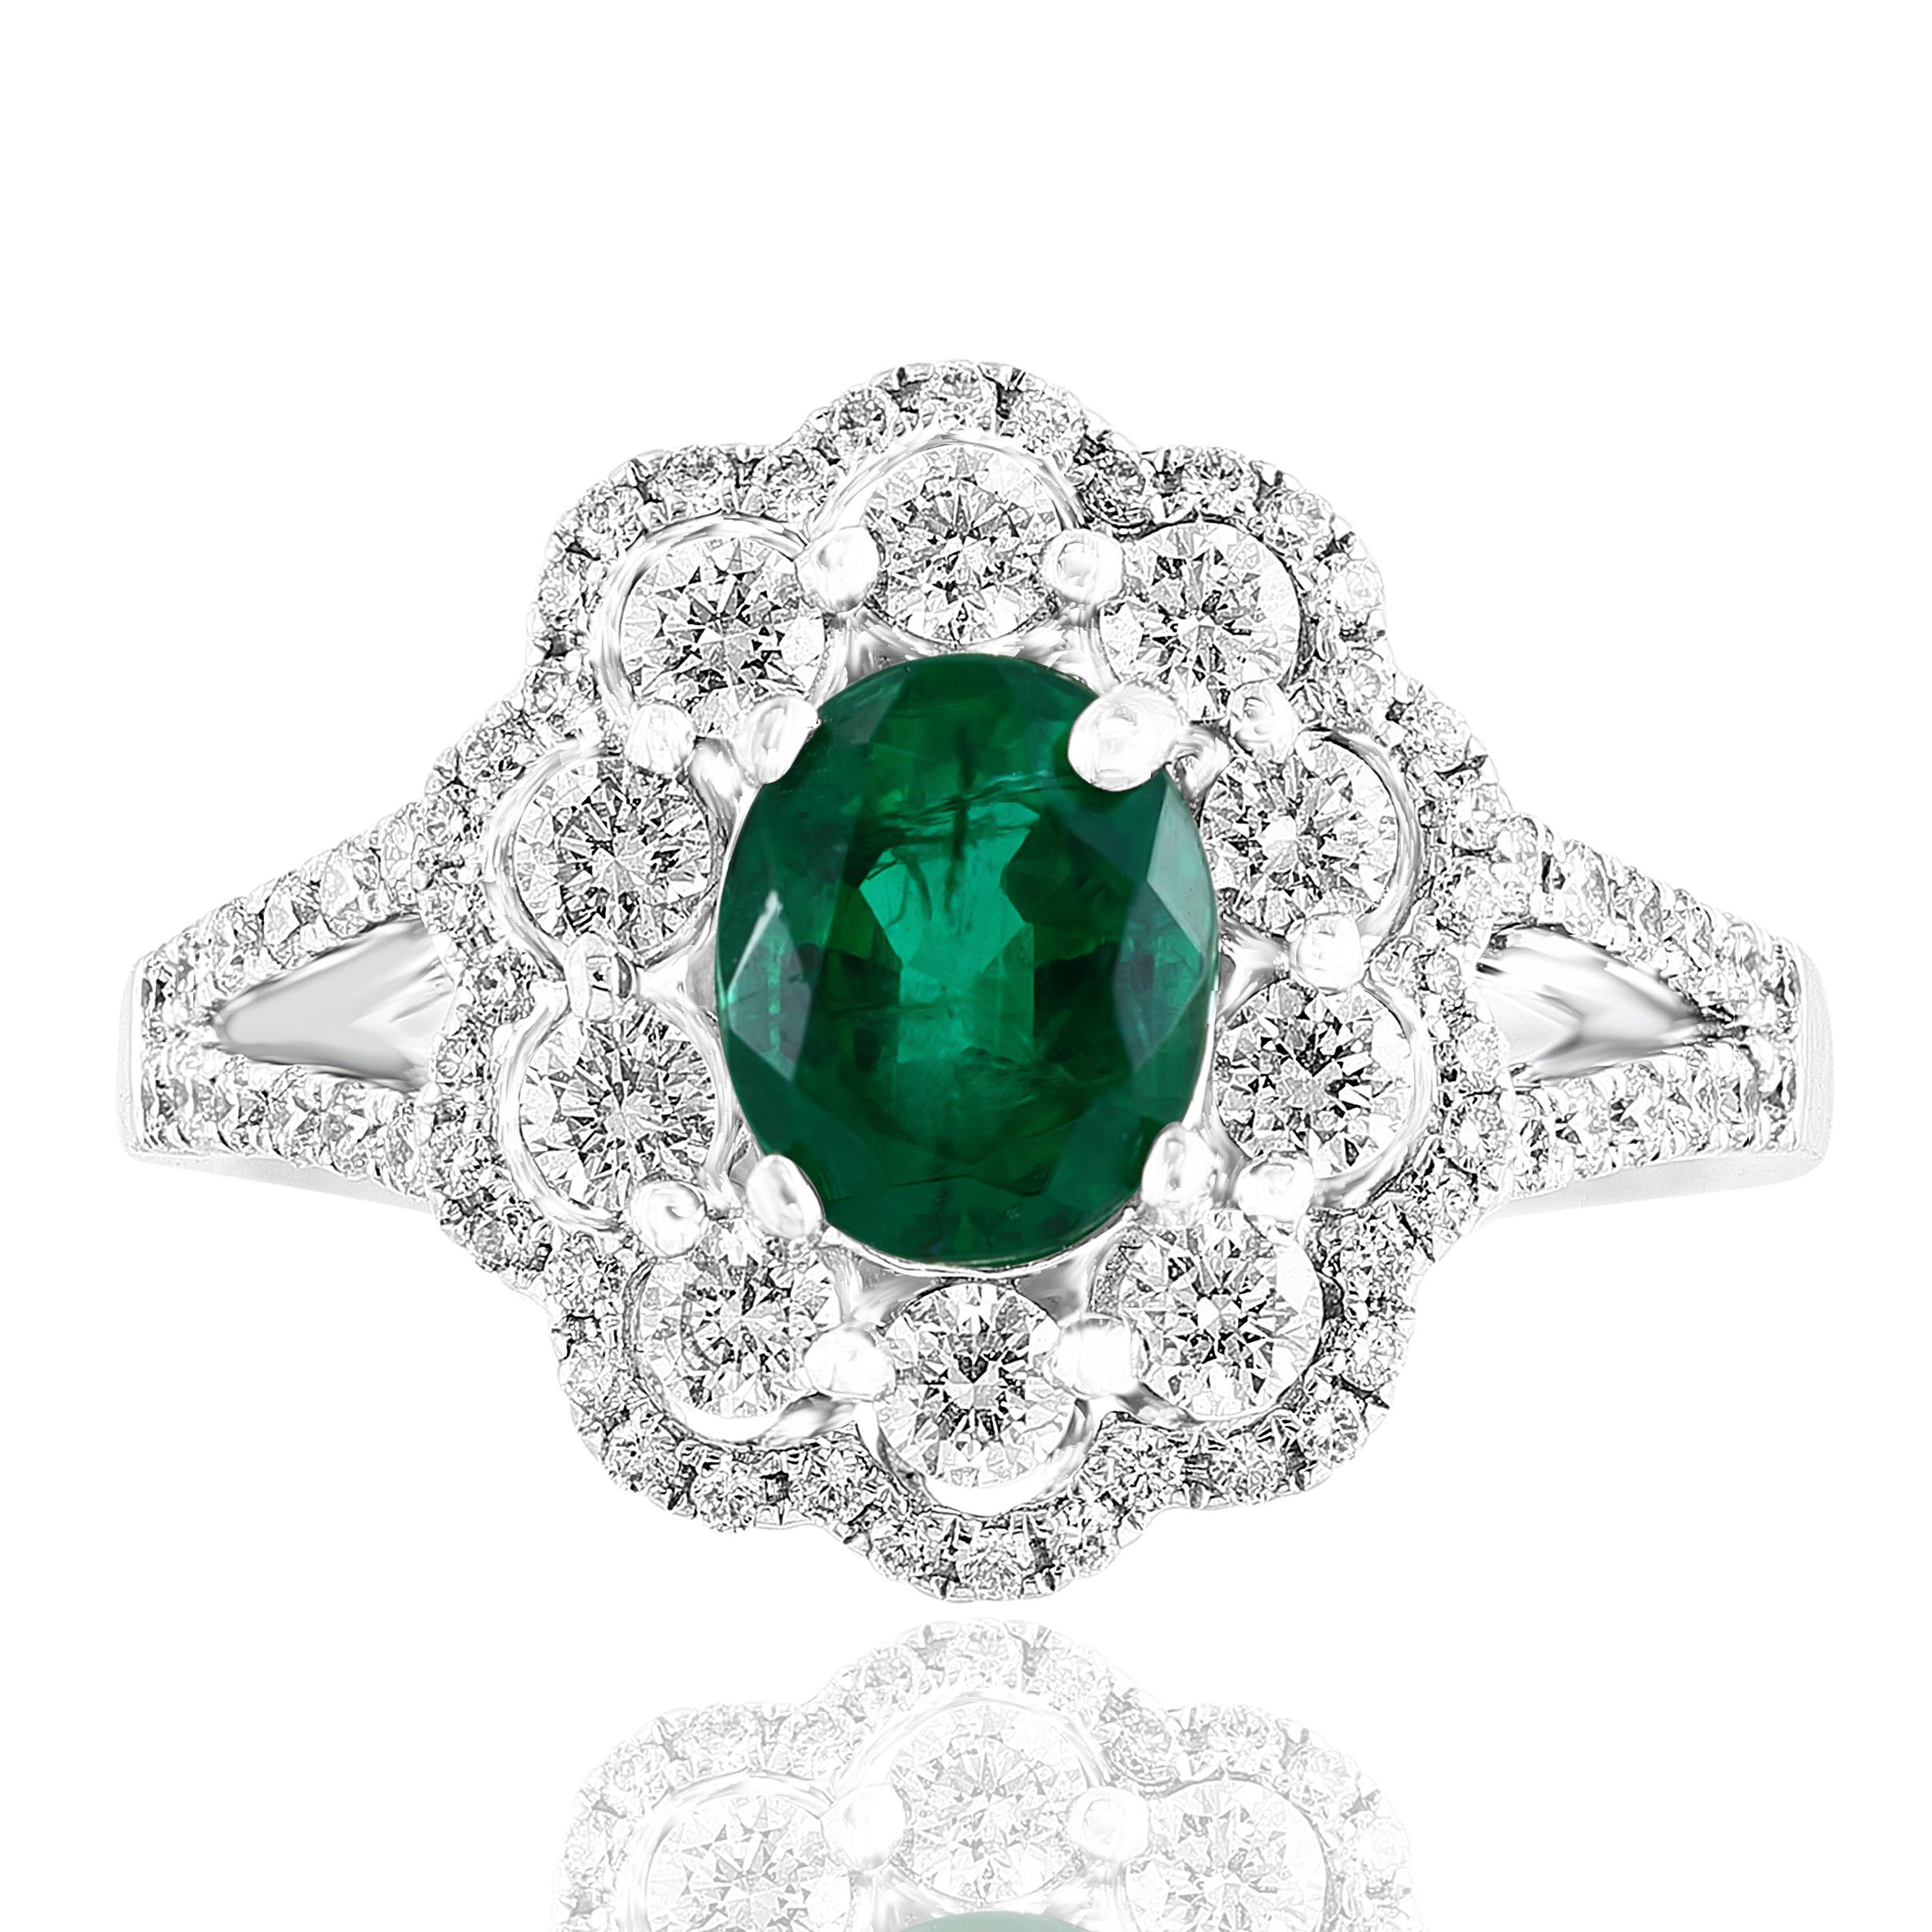 A stylish cocktail ring showcasing a 1.25-carat color-rich emerald, surrounded by rows of round brilliant diamonds in a flower design. 74 Diamonds weigh 0.74 carats in total. Made in 18k white gold.

Size 6.5 US (Sizable). One of a Kind piece.
All